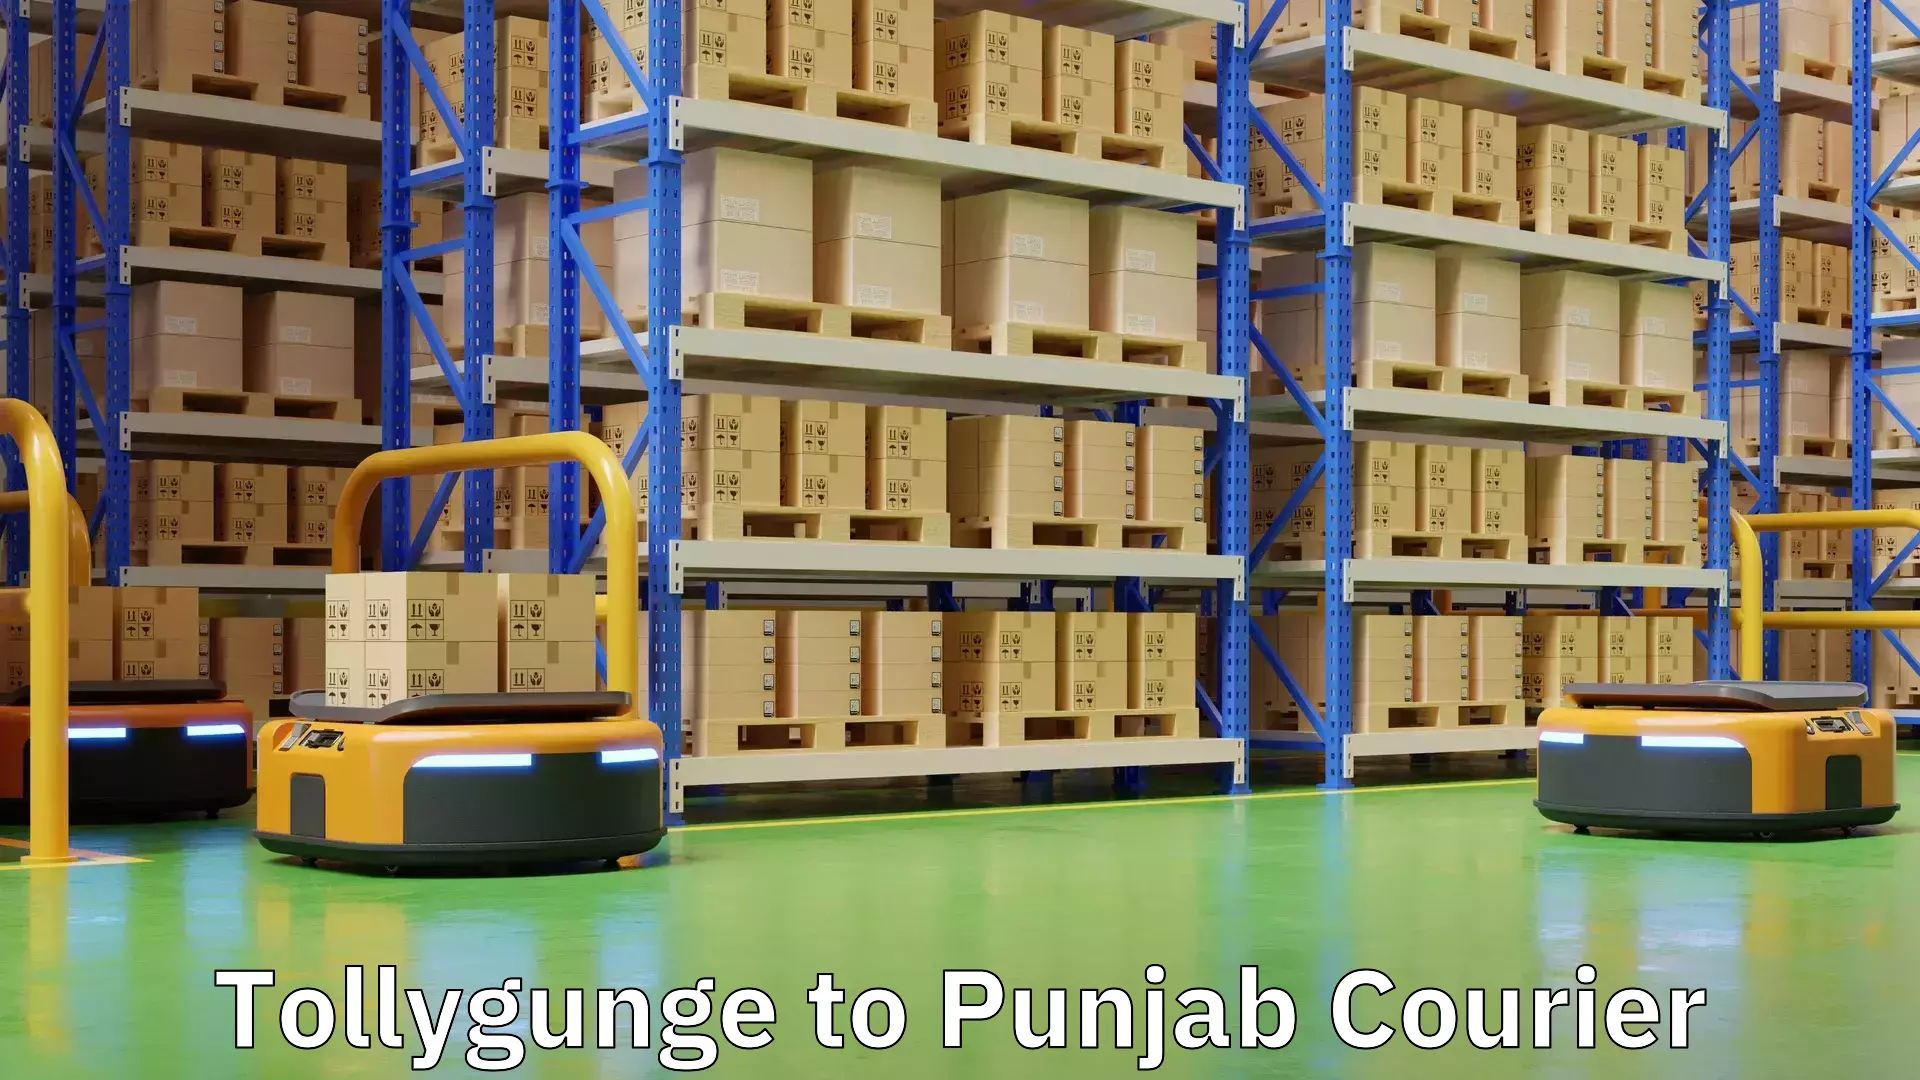 Advanced package delivery in Tollygunge to Punjab